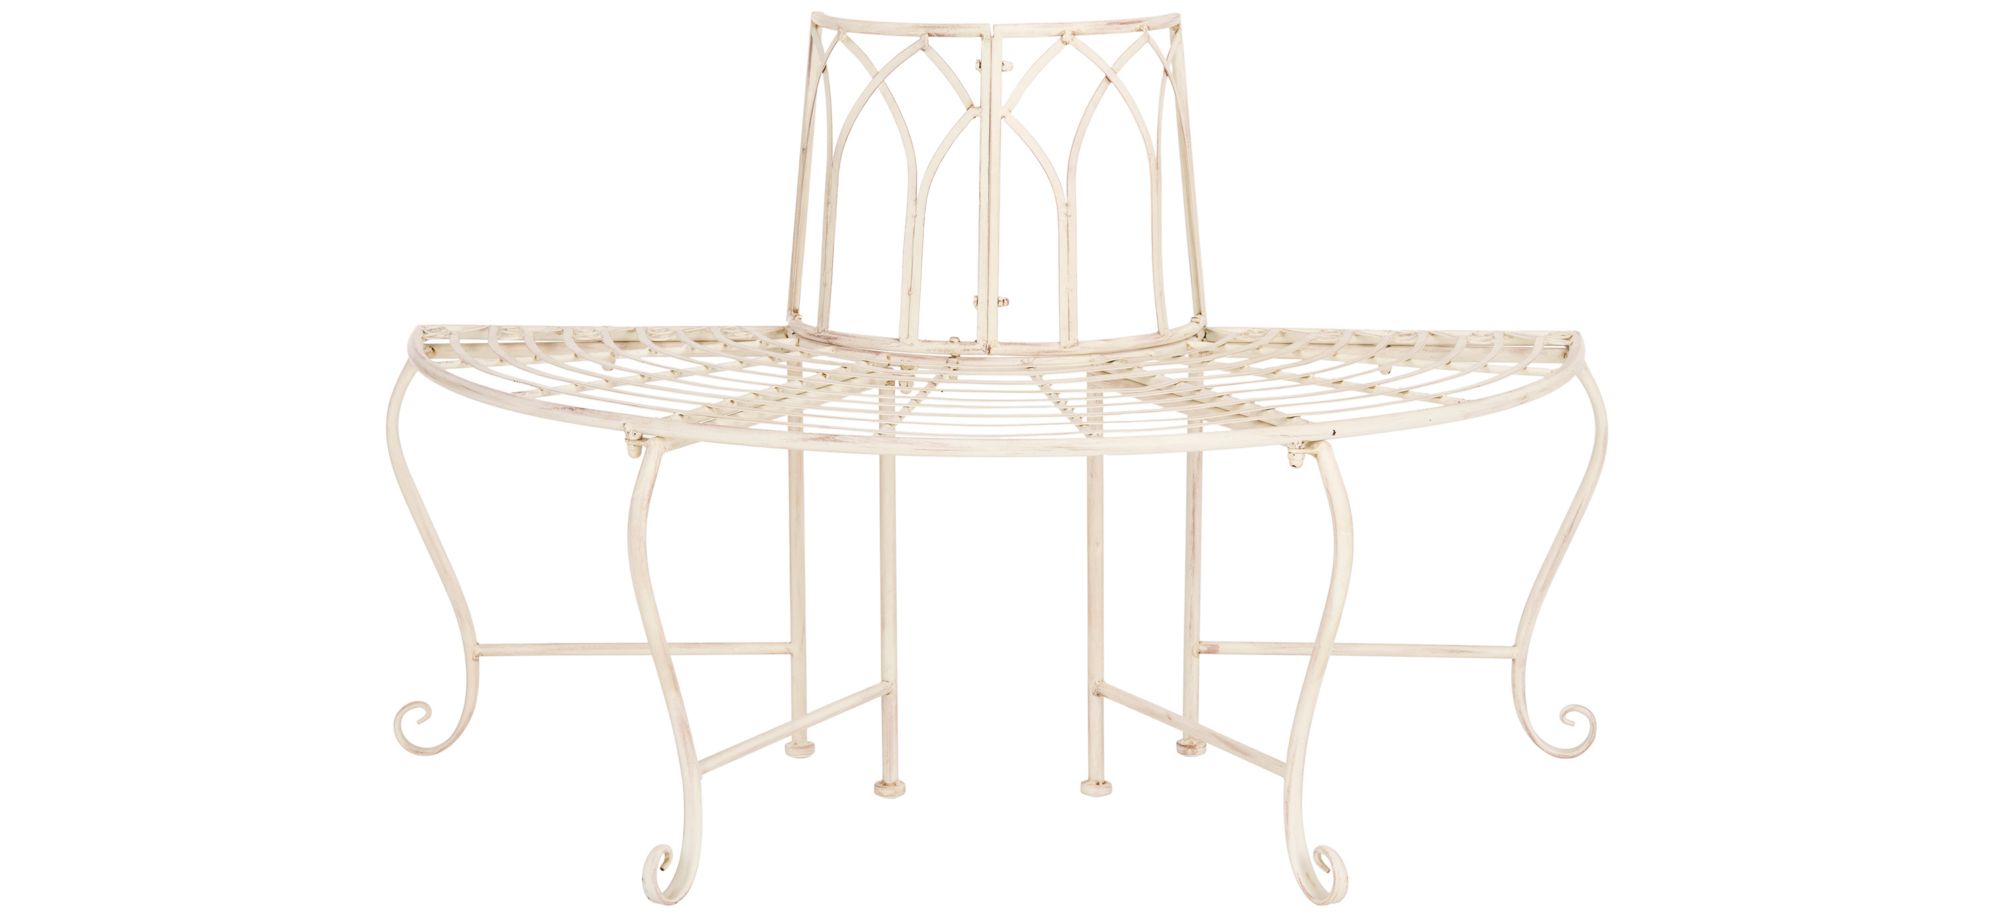 Joella Outdoor Wrought Iron Tree Bench in White by Safavieh